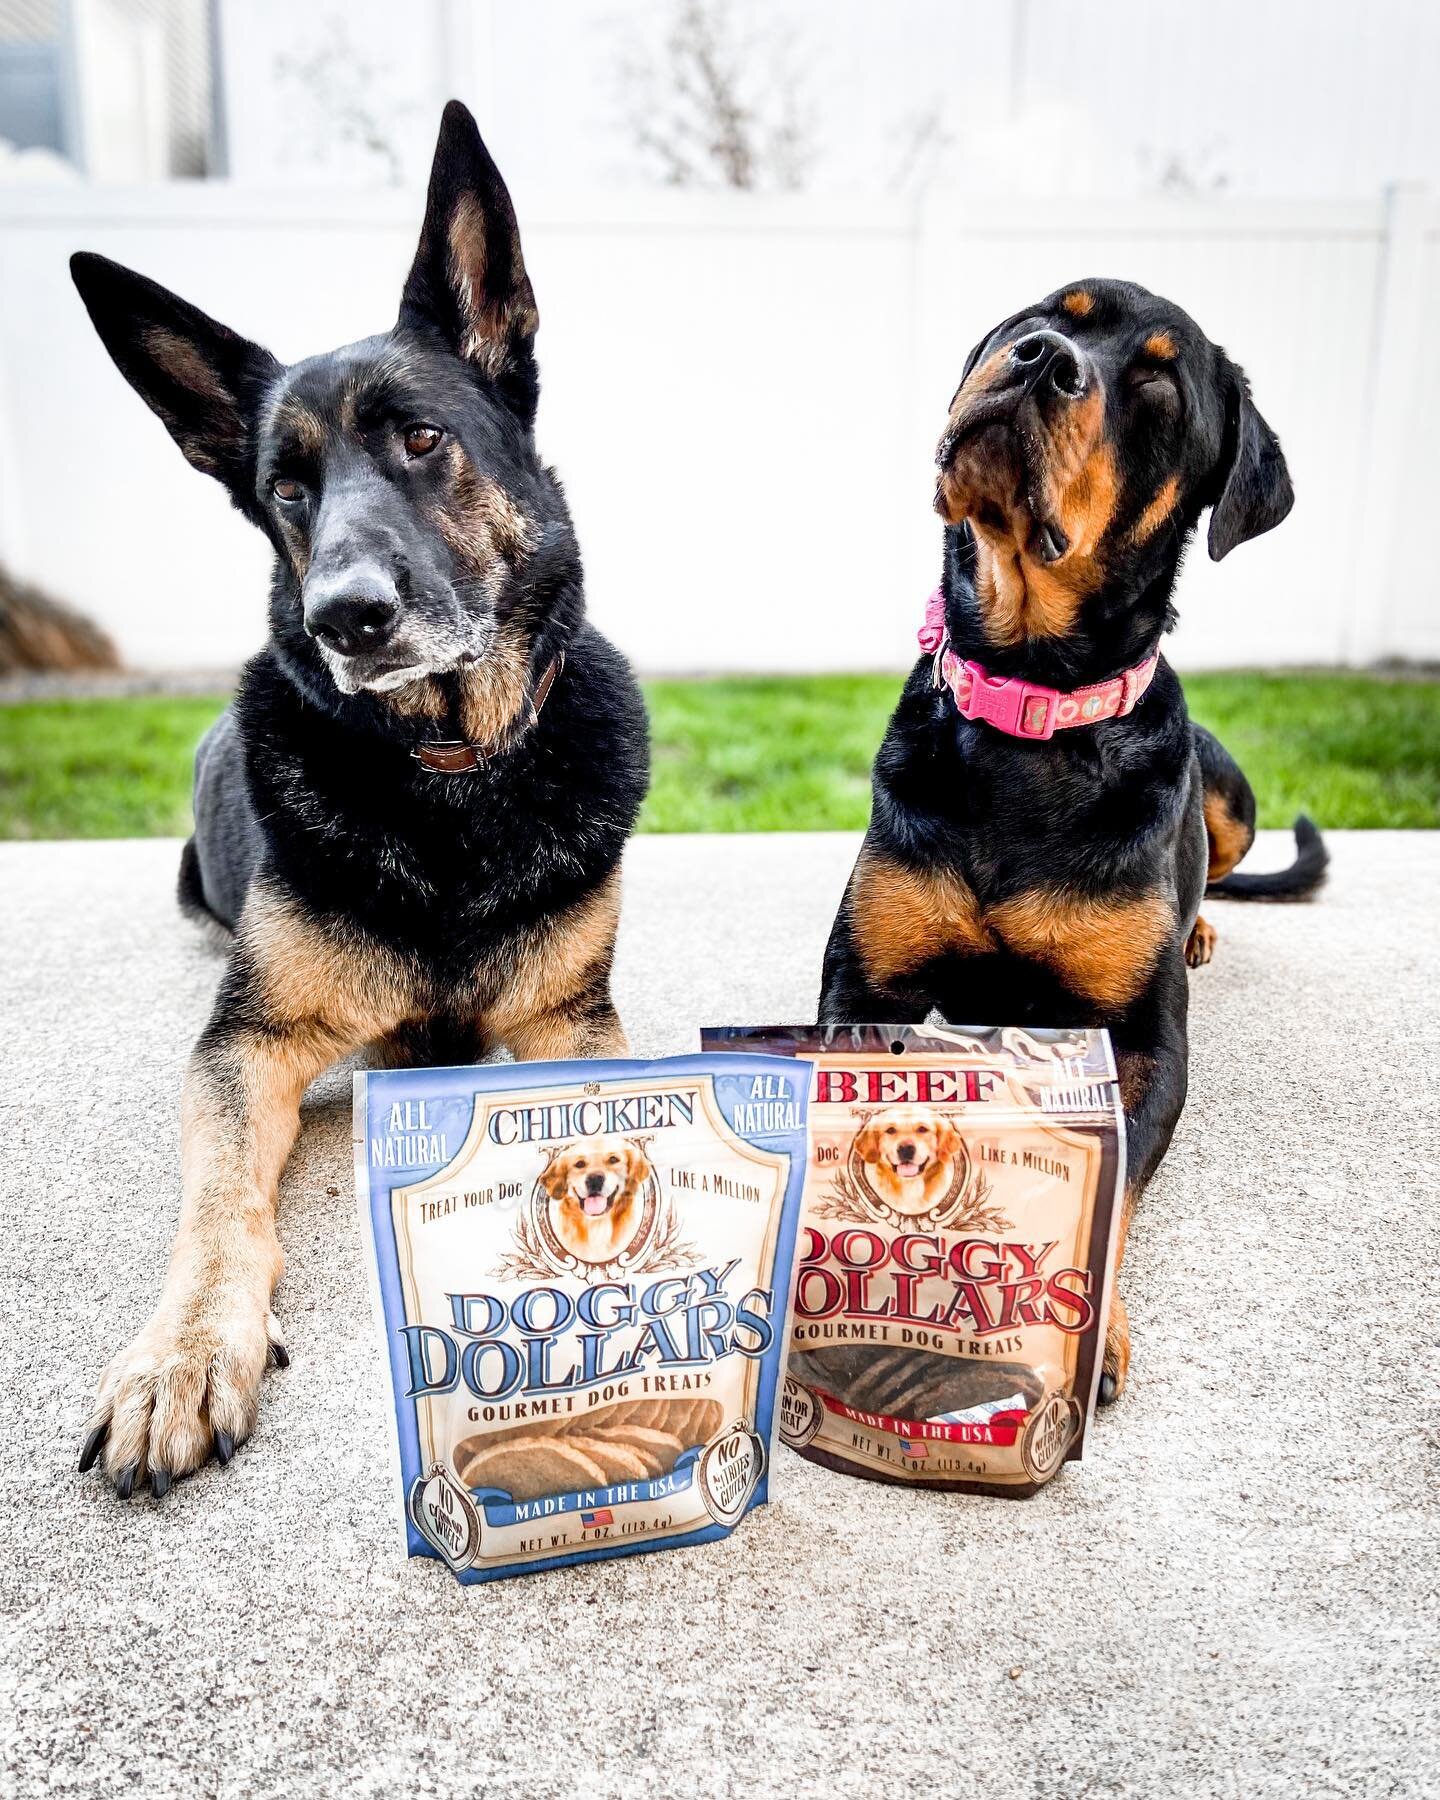 🤍
*The models were rewarded with a generous portion of the promoted product&hellip;
▫️

- #americanmade #doggydollars #dogtreats #bestdogtreats #limitedingredient #dogsofinsta #limitedingredientdogtreats #dogsofinstagram  #doglife #happydog #healthy